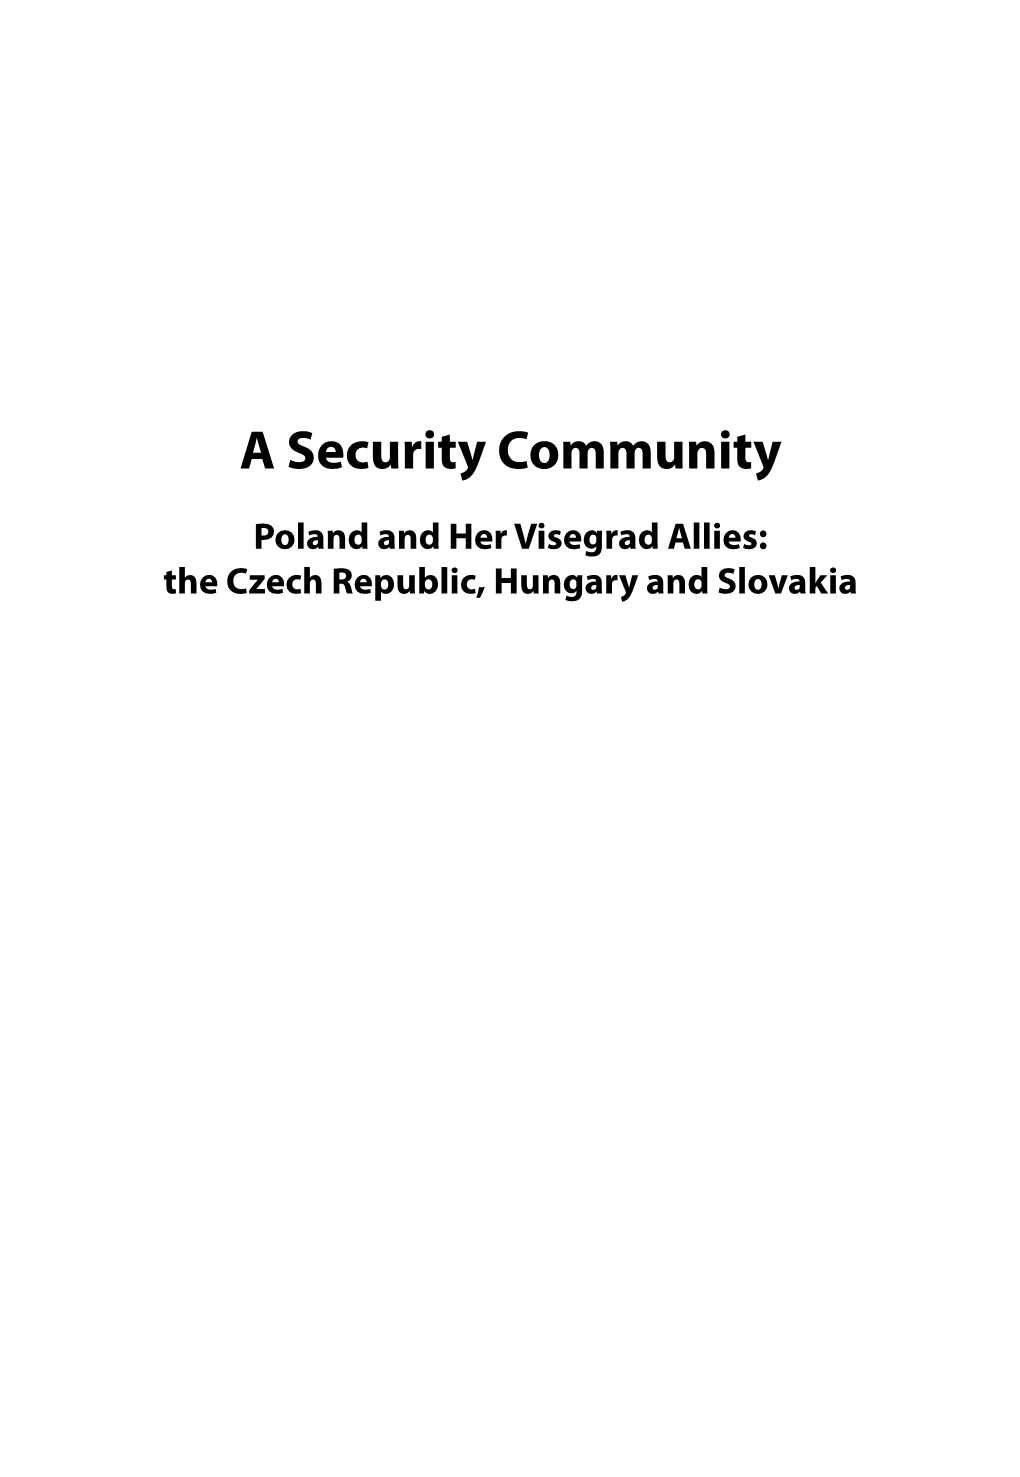 A Security Community Poland and Her Visegrad Allies: the Czech